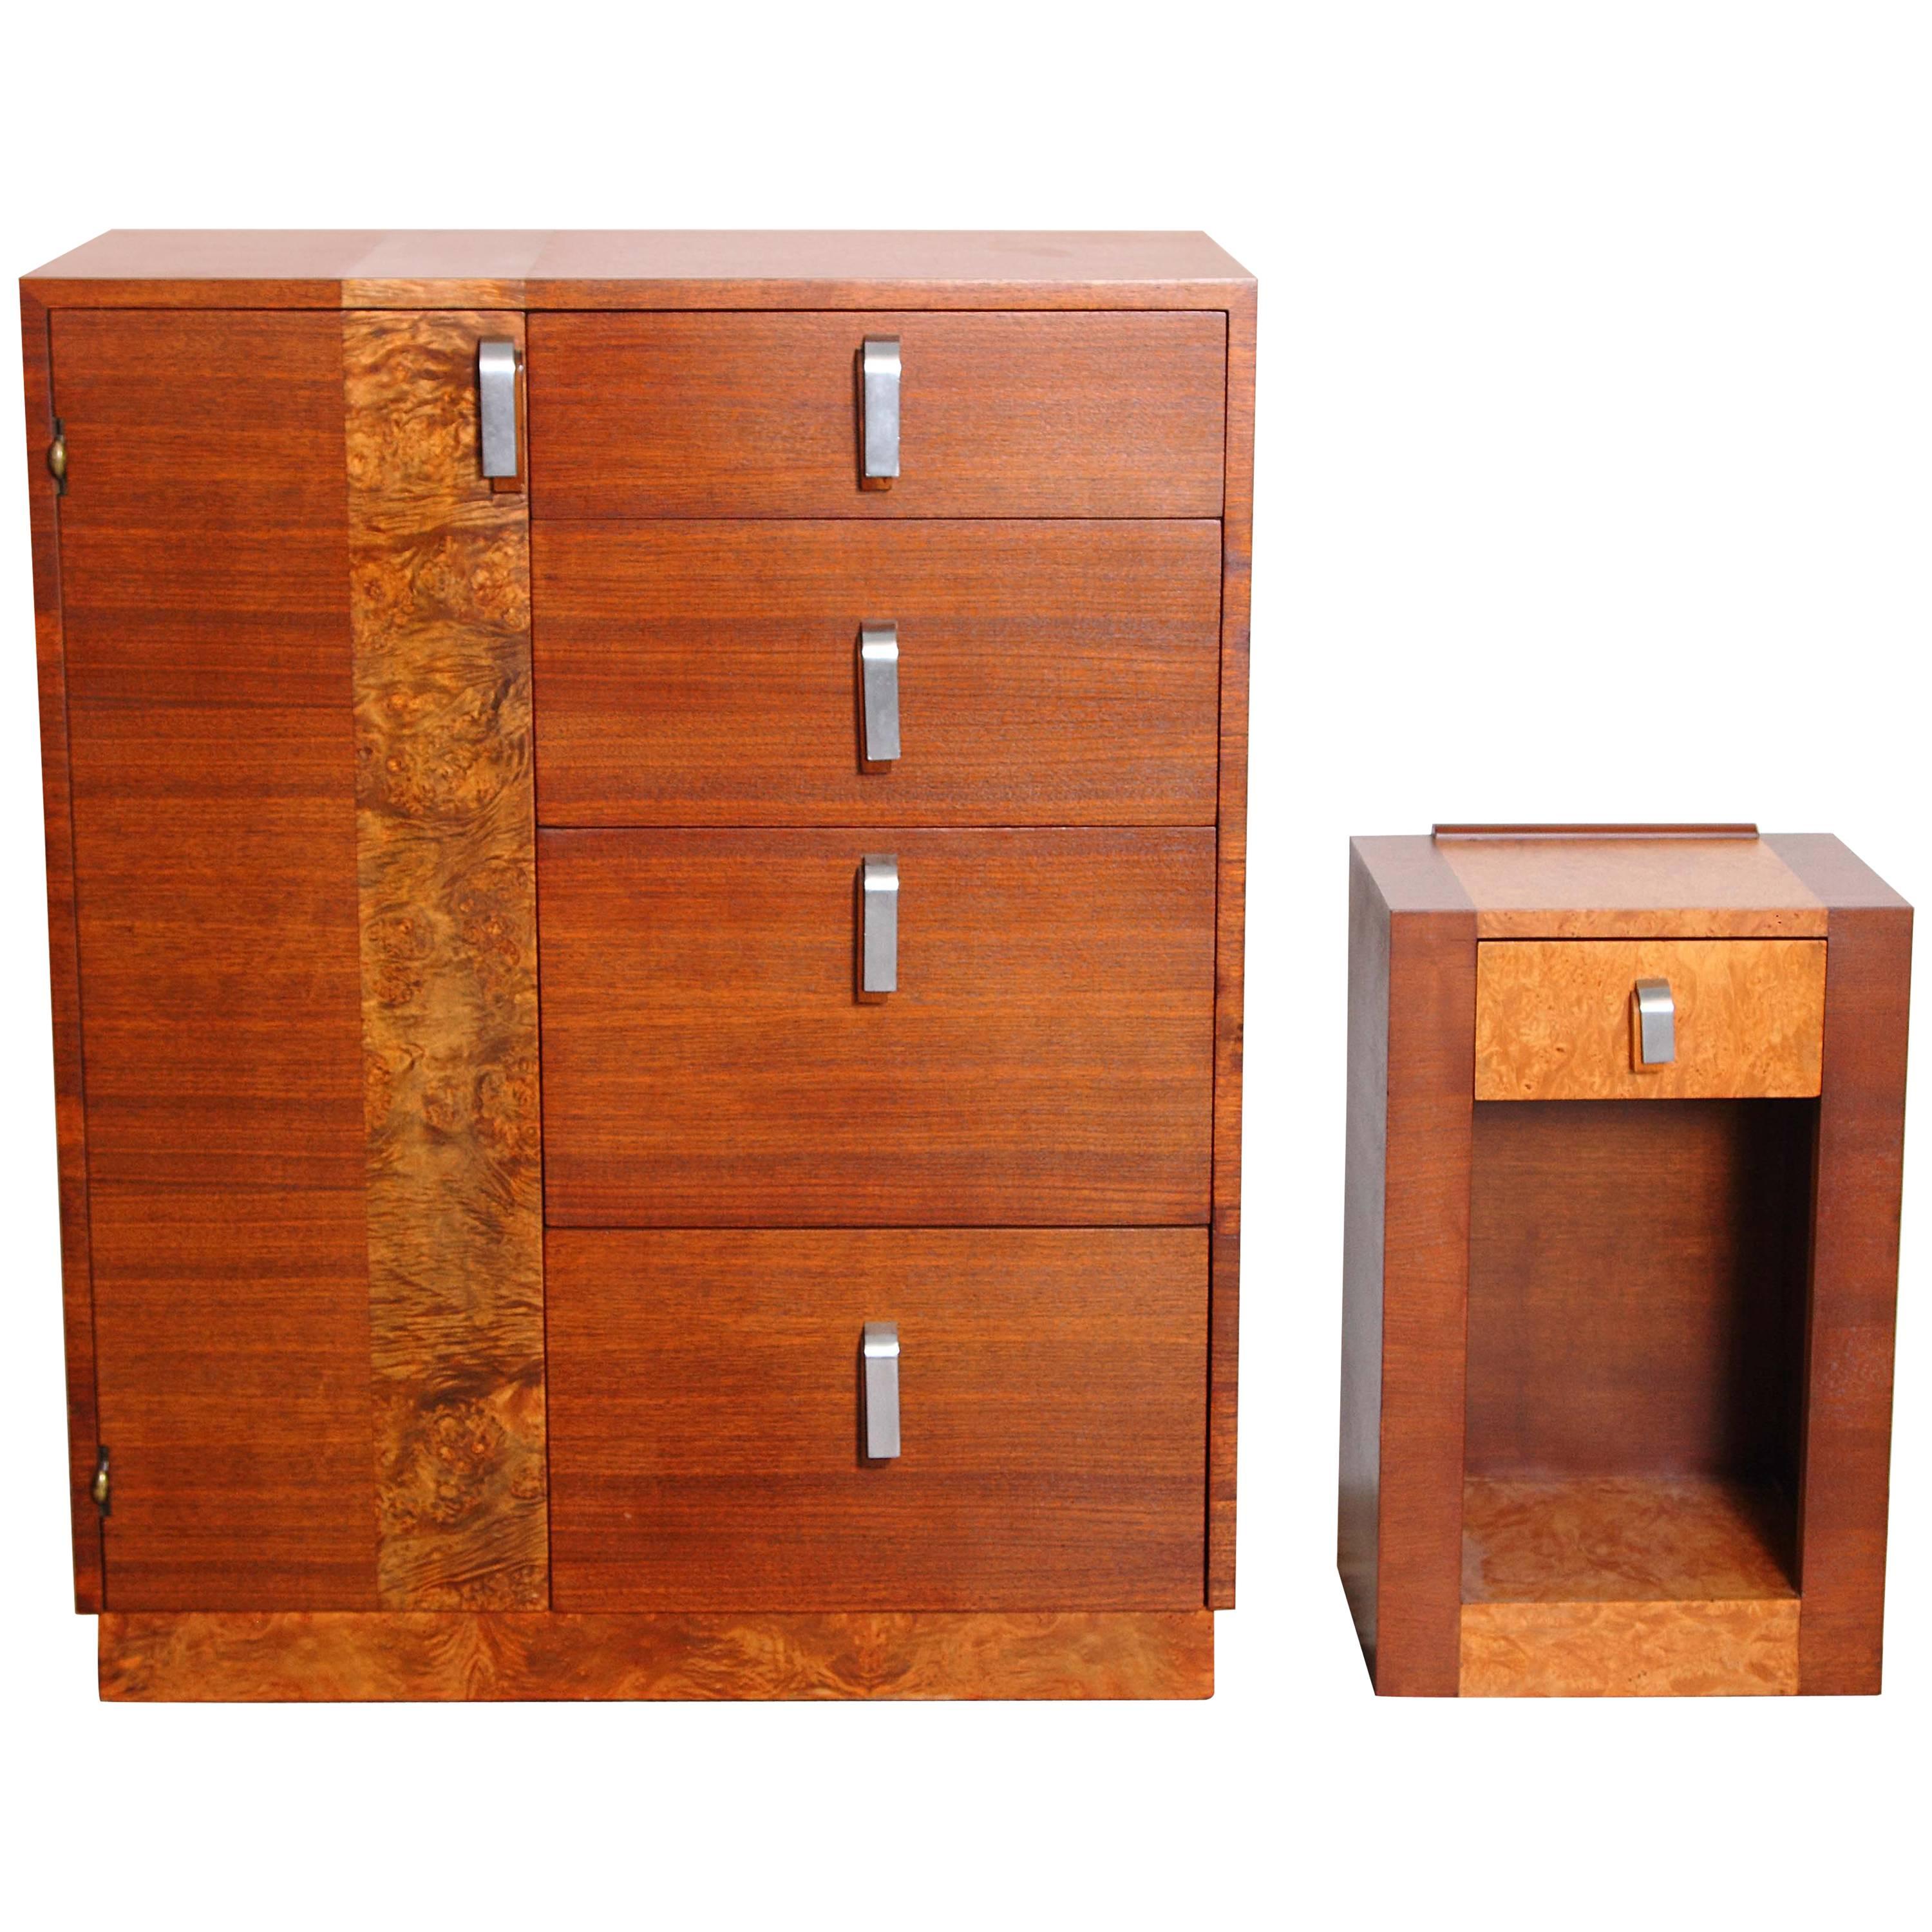 Uncommon Gilbert Rohde for Herman Miller, 1933 Series Valet and Nightstand For Sale